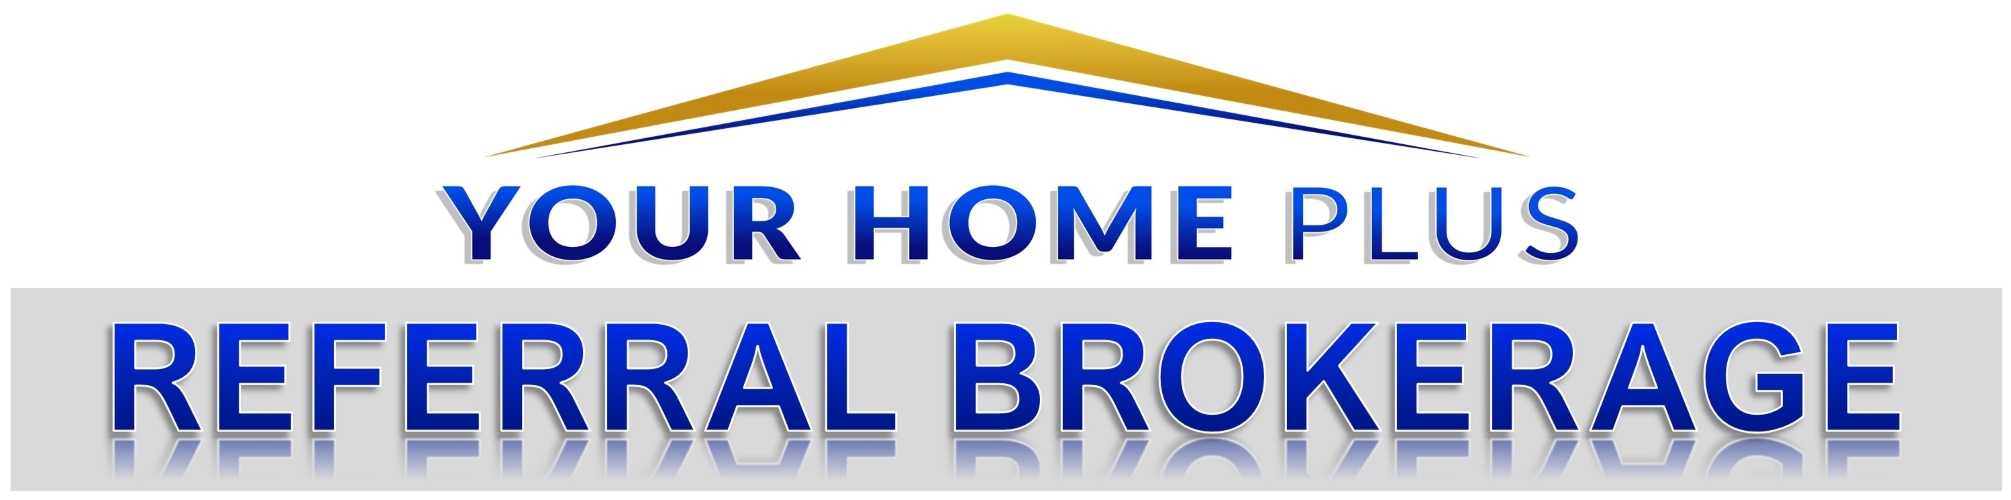 Your Home Plus Referral Brokerage